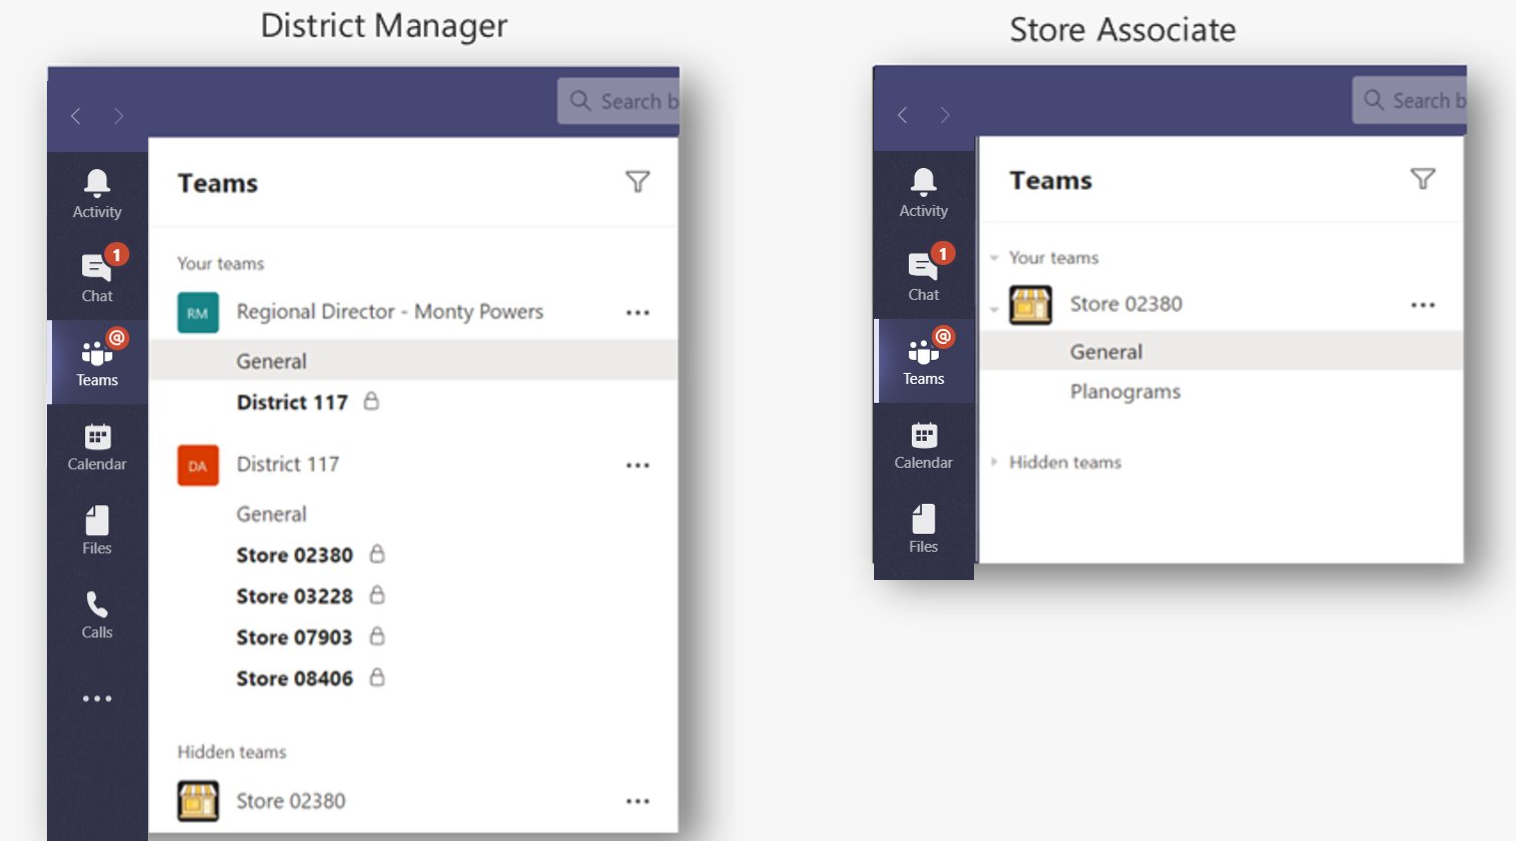 Screenshot that shows the District manager and store associate's interface of Teams channels.